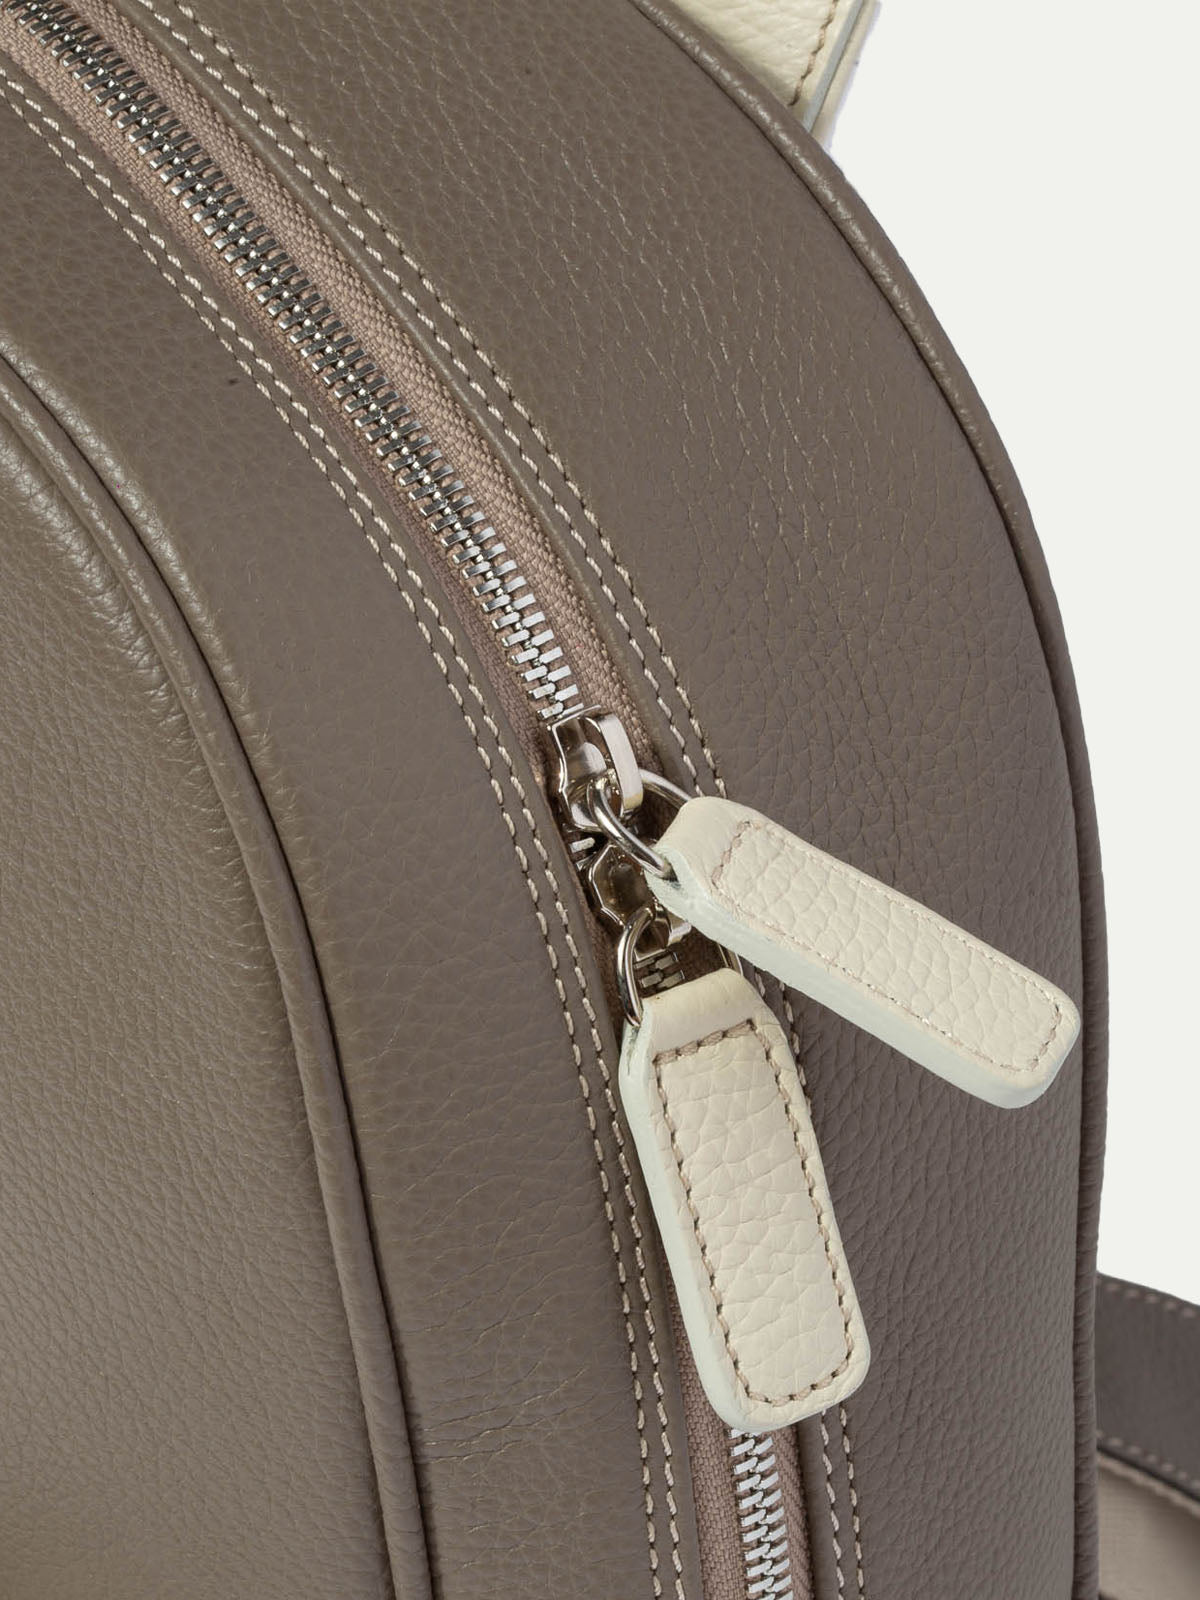 Taupe leather backpack - Made in Italy